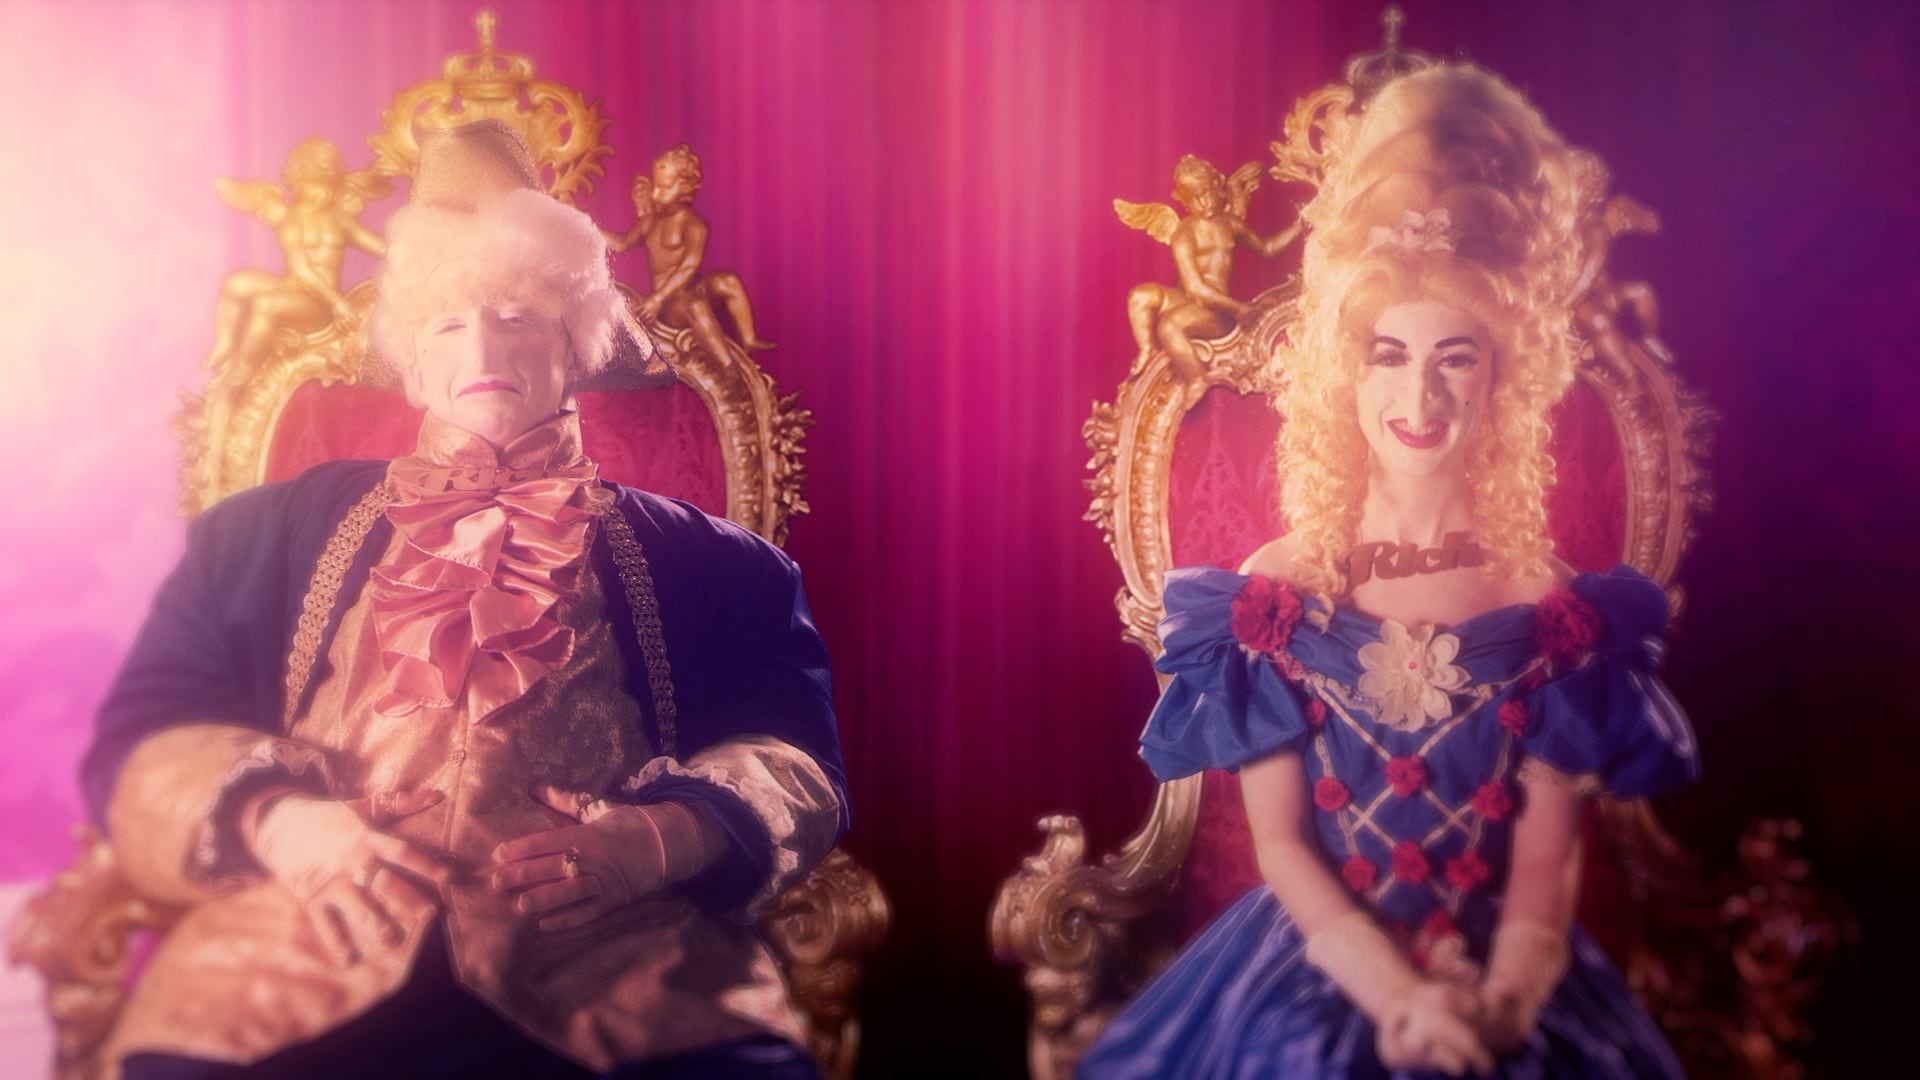 A king and queen sit side by side on matching thrones. They are dressed in exaggerated, garish Georgian outfits with powdered wigs and prosthetic facial features.